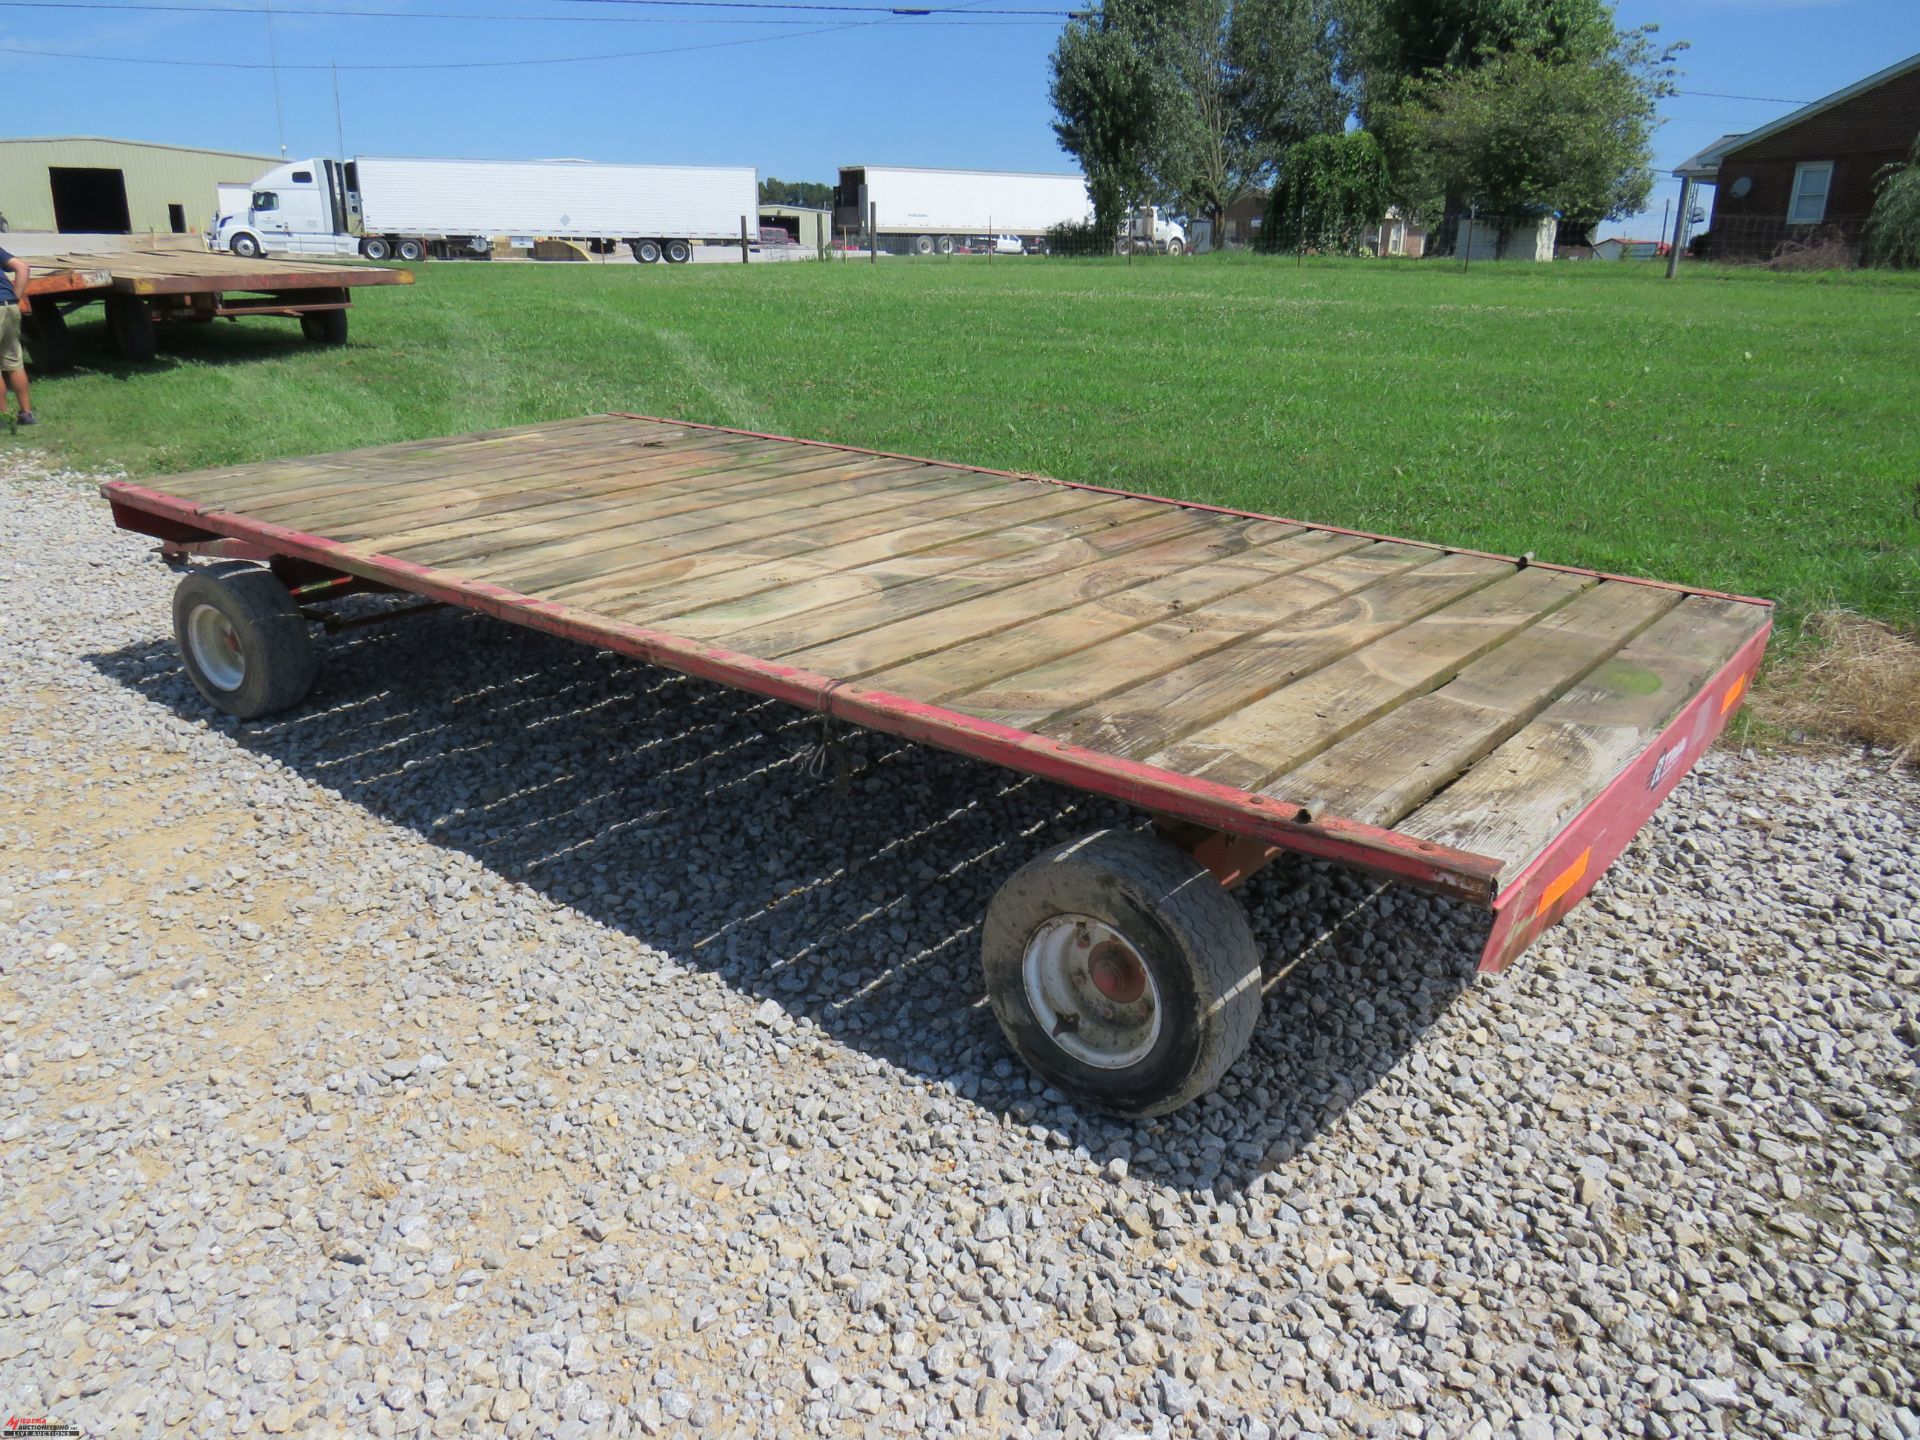 EZ TRAIL FLAT BED TRAILER, 15', PIN HITCH, SMALL TIRES - Image 4 of 6